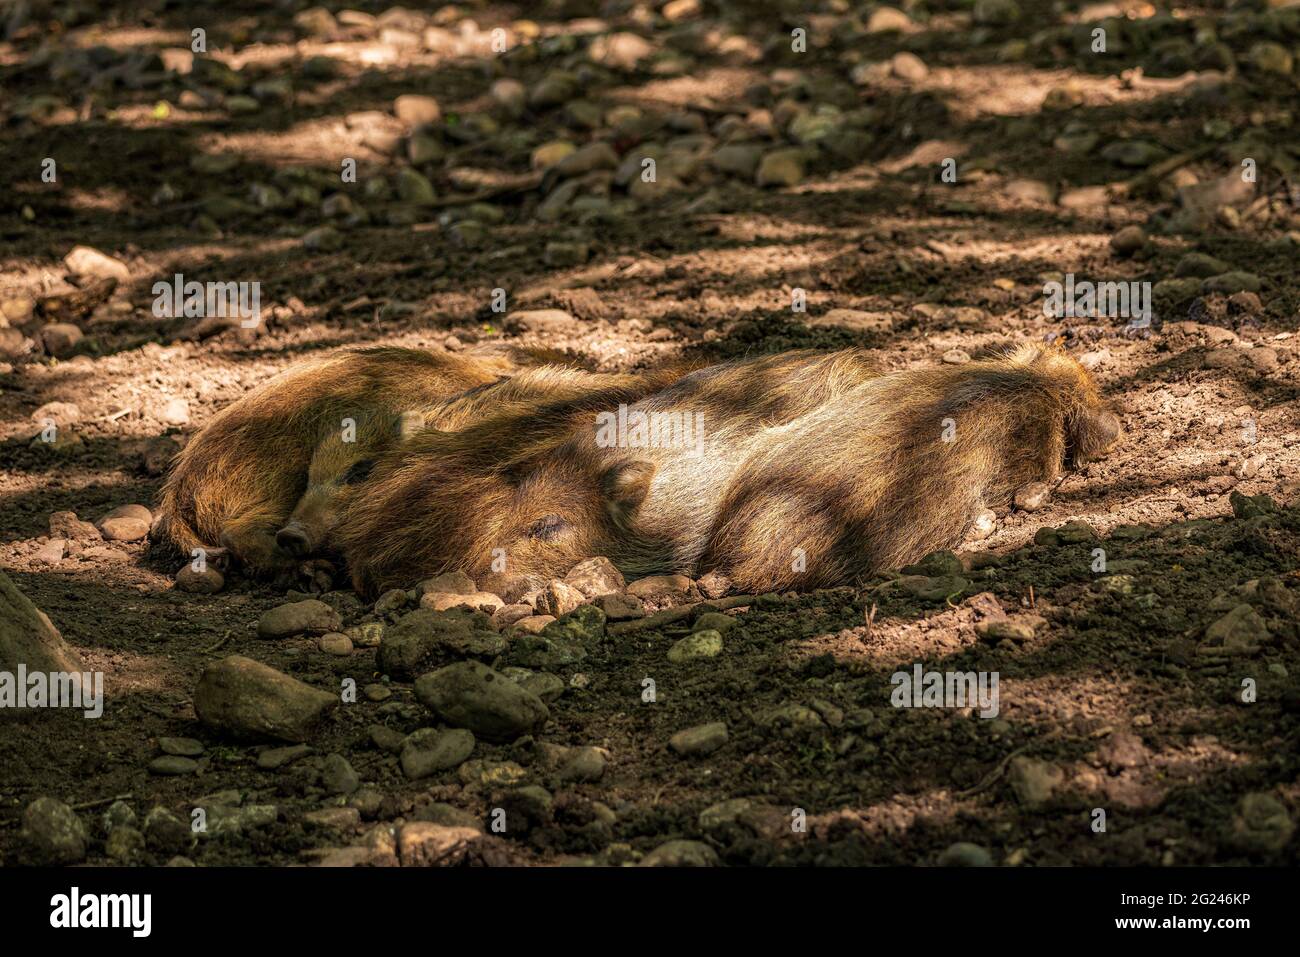 Wild boars in the natural forest Stock Photo